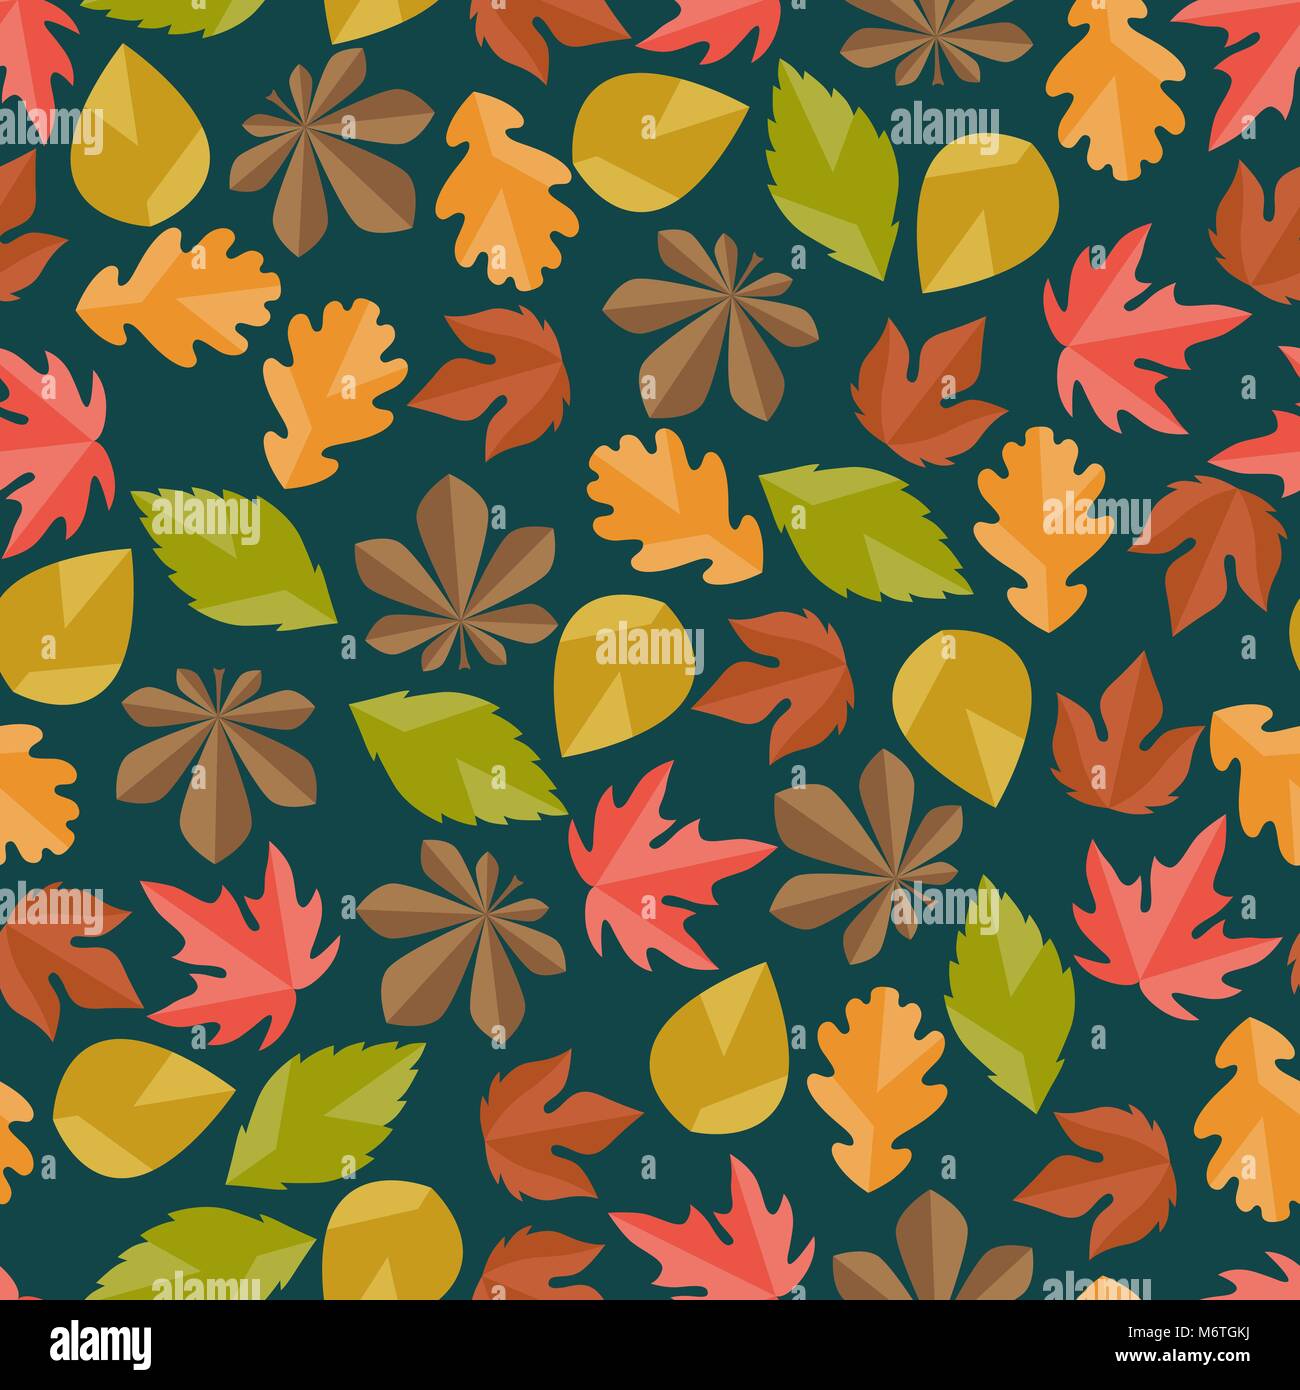 Seamless pattern with autumn leaves Stock Vector